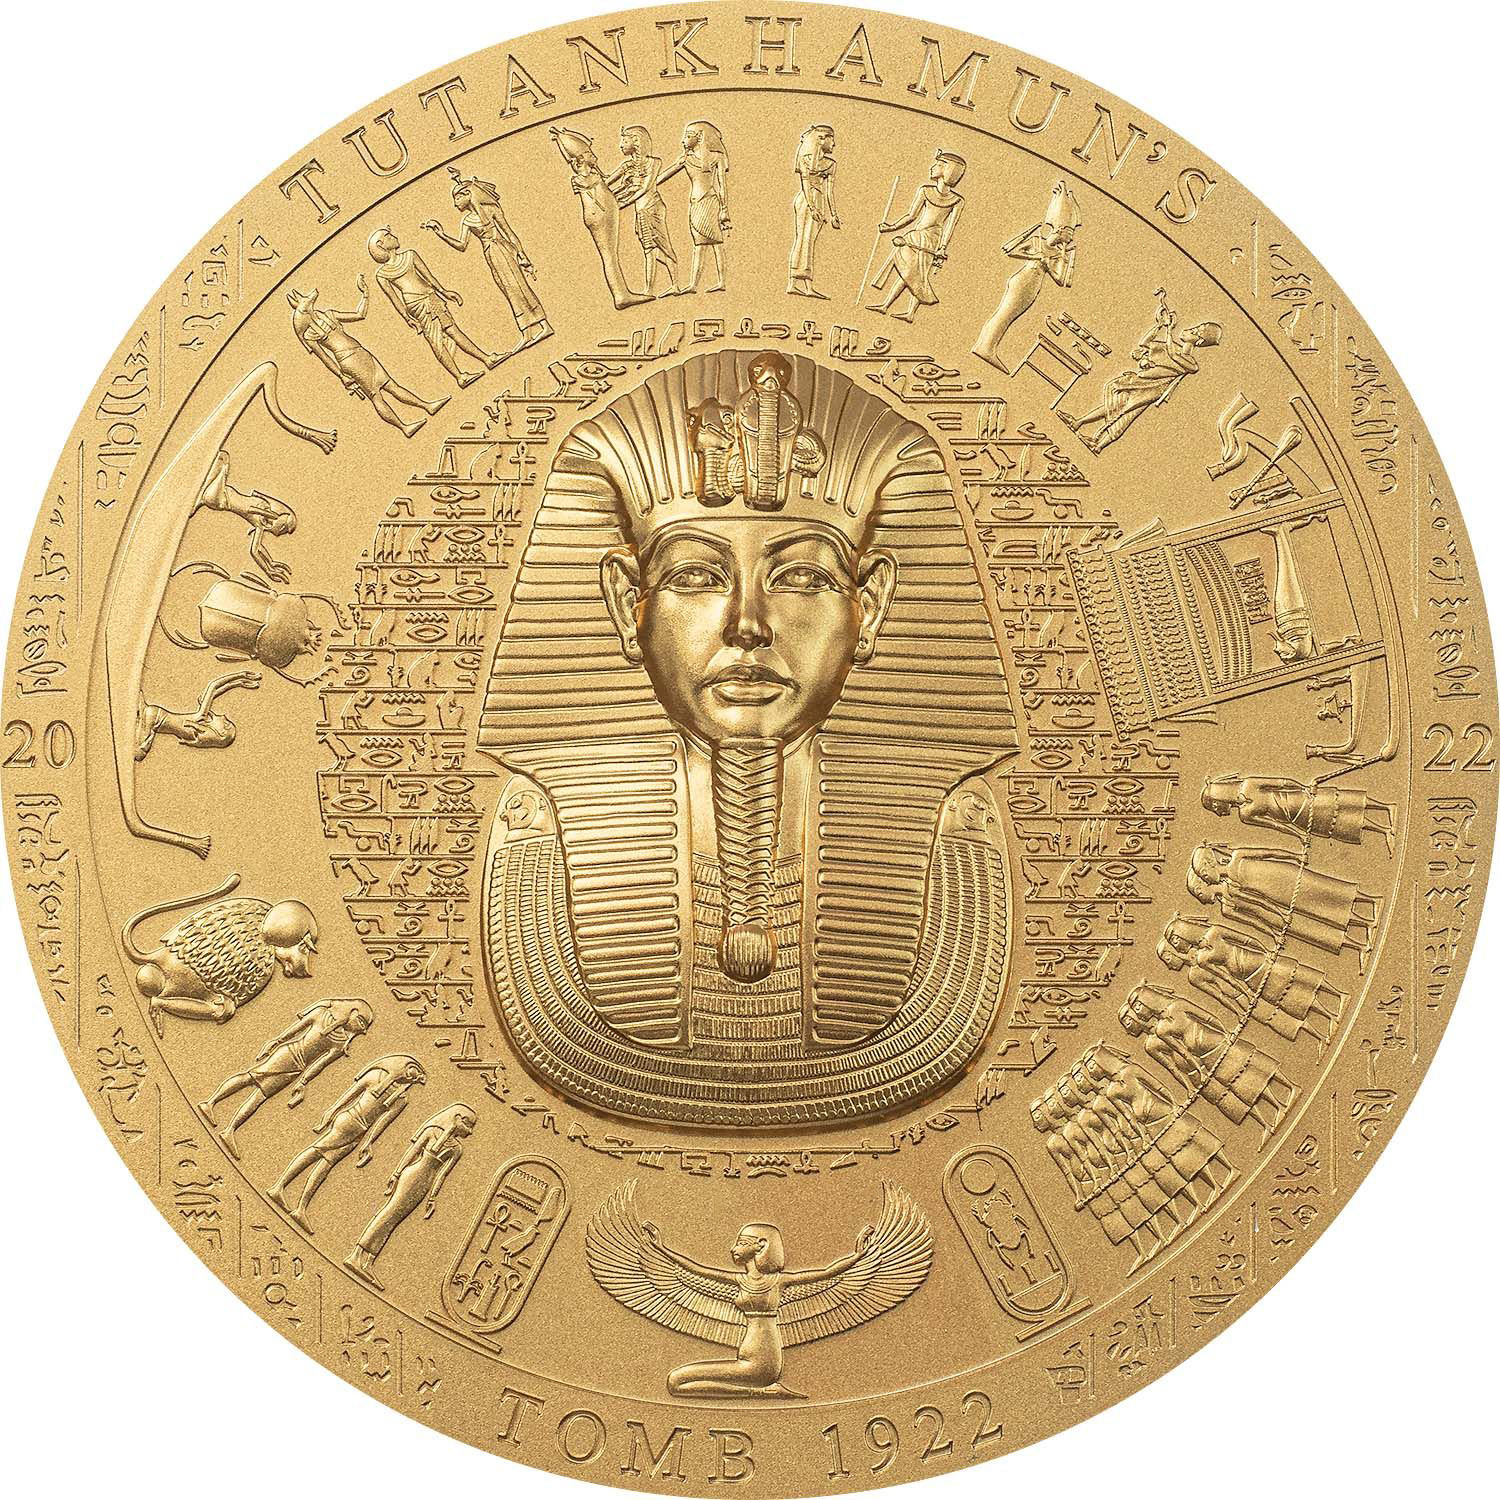 Cook Islands 2022 20 Dollars Tutankhamun's Tomb 1922 Archeology Symbolism Series Silver Coin Gilded